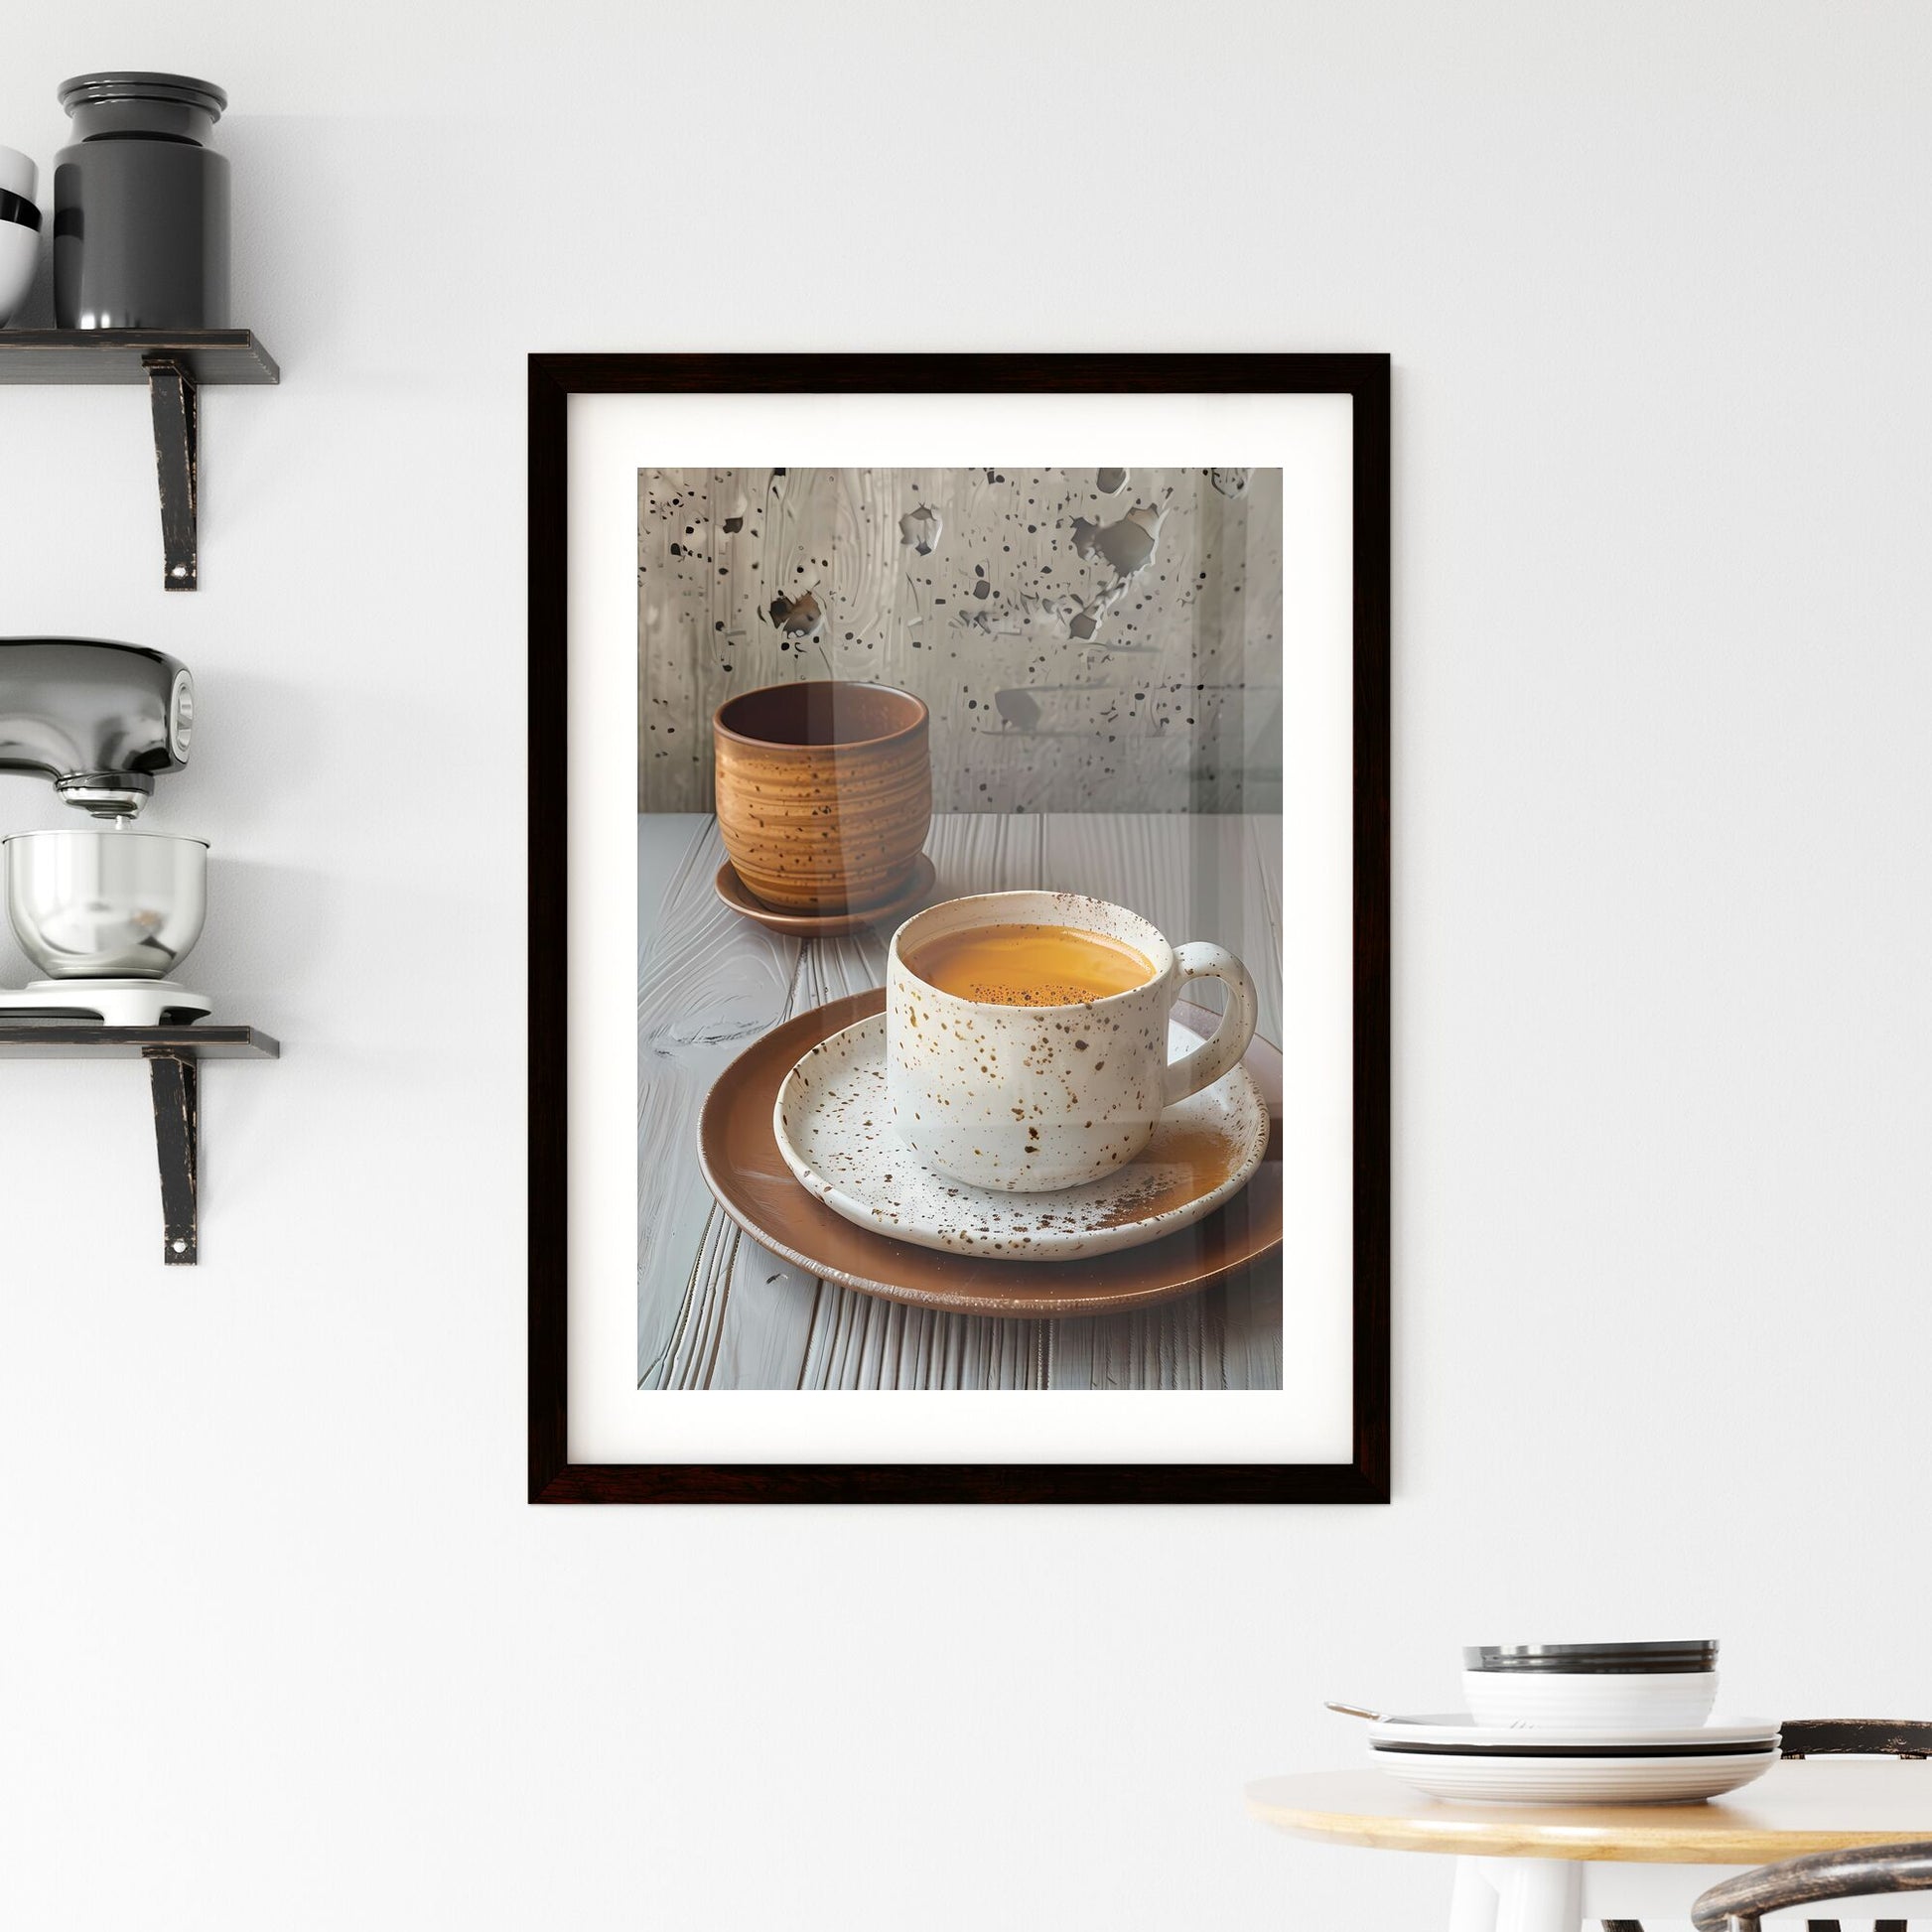 Artfully Arranged Minimalist Coffee Mug and Plates in Neo-Concrete Style, Featuring Vibrant Drugcore Elements and Provia Hyper-Realistic Water Default Title